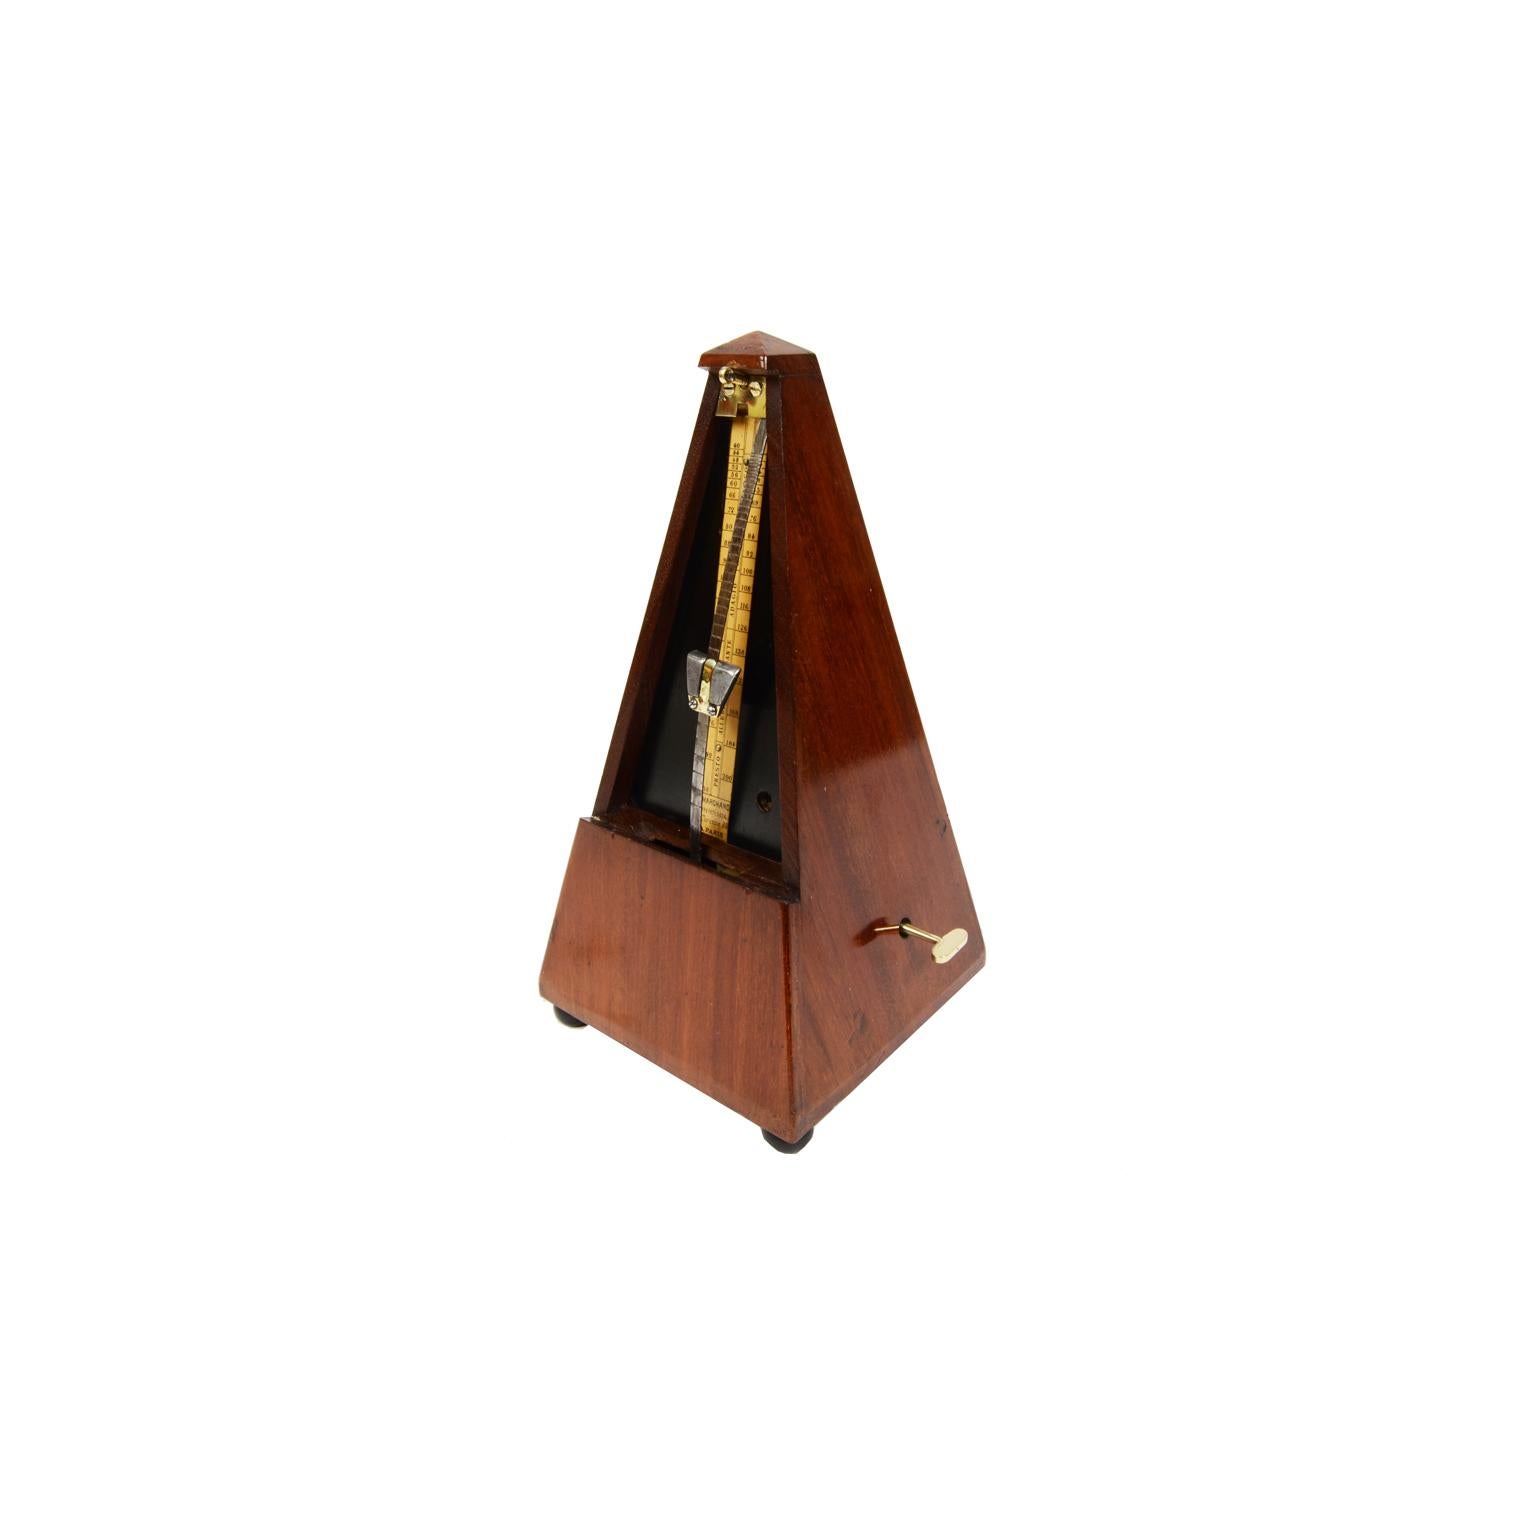 Mechanical metronome by the Maison Lemarchand, 80 Rue de Turenne in Paris SGDG patent, from the early 1900s. It is a French Patent without government guarantee, exempt from government liability to both purchasers and users of the product. In 1844 a